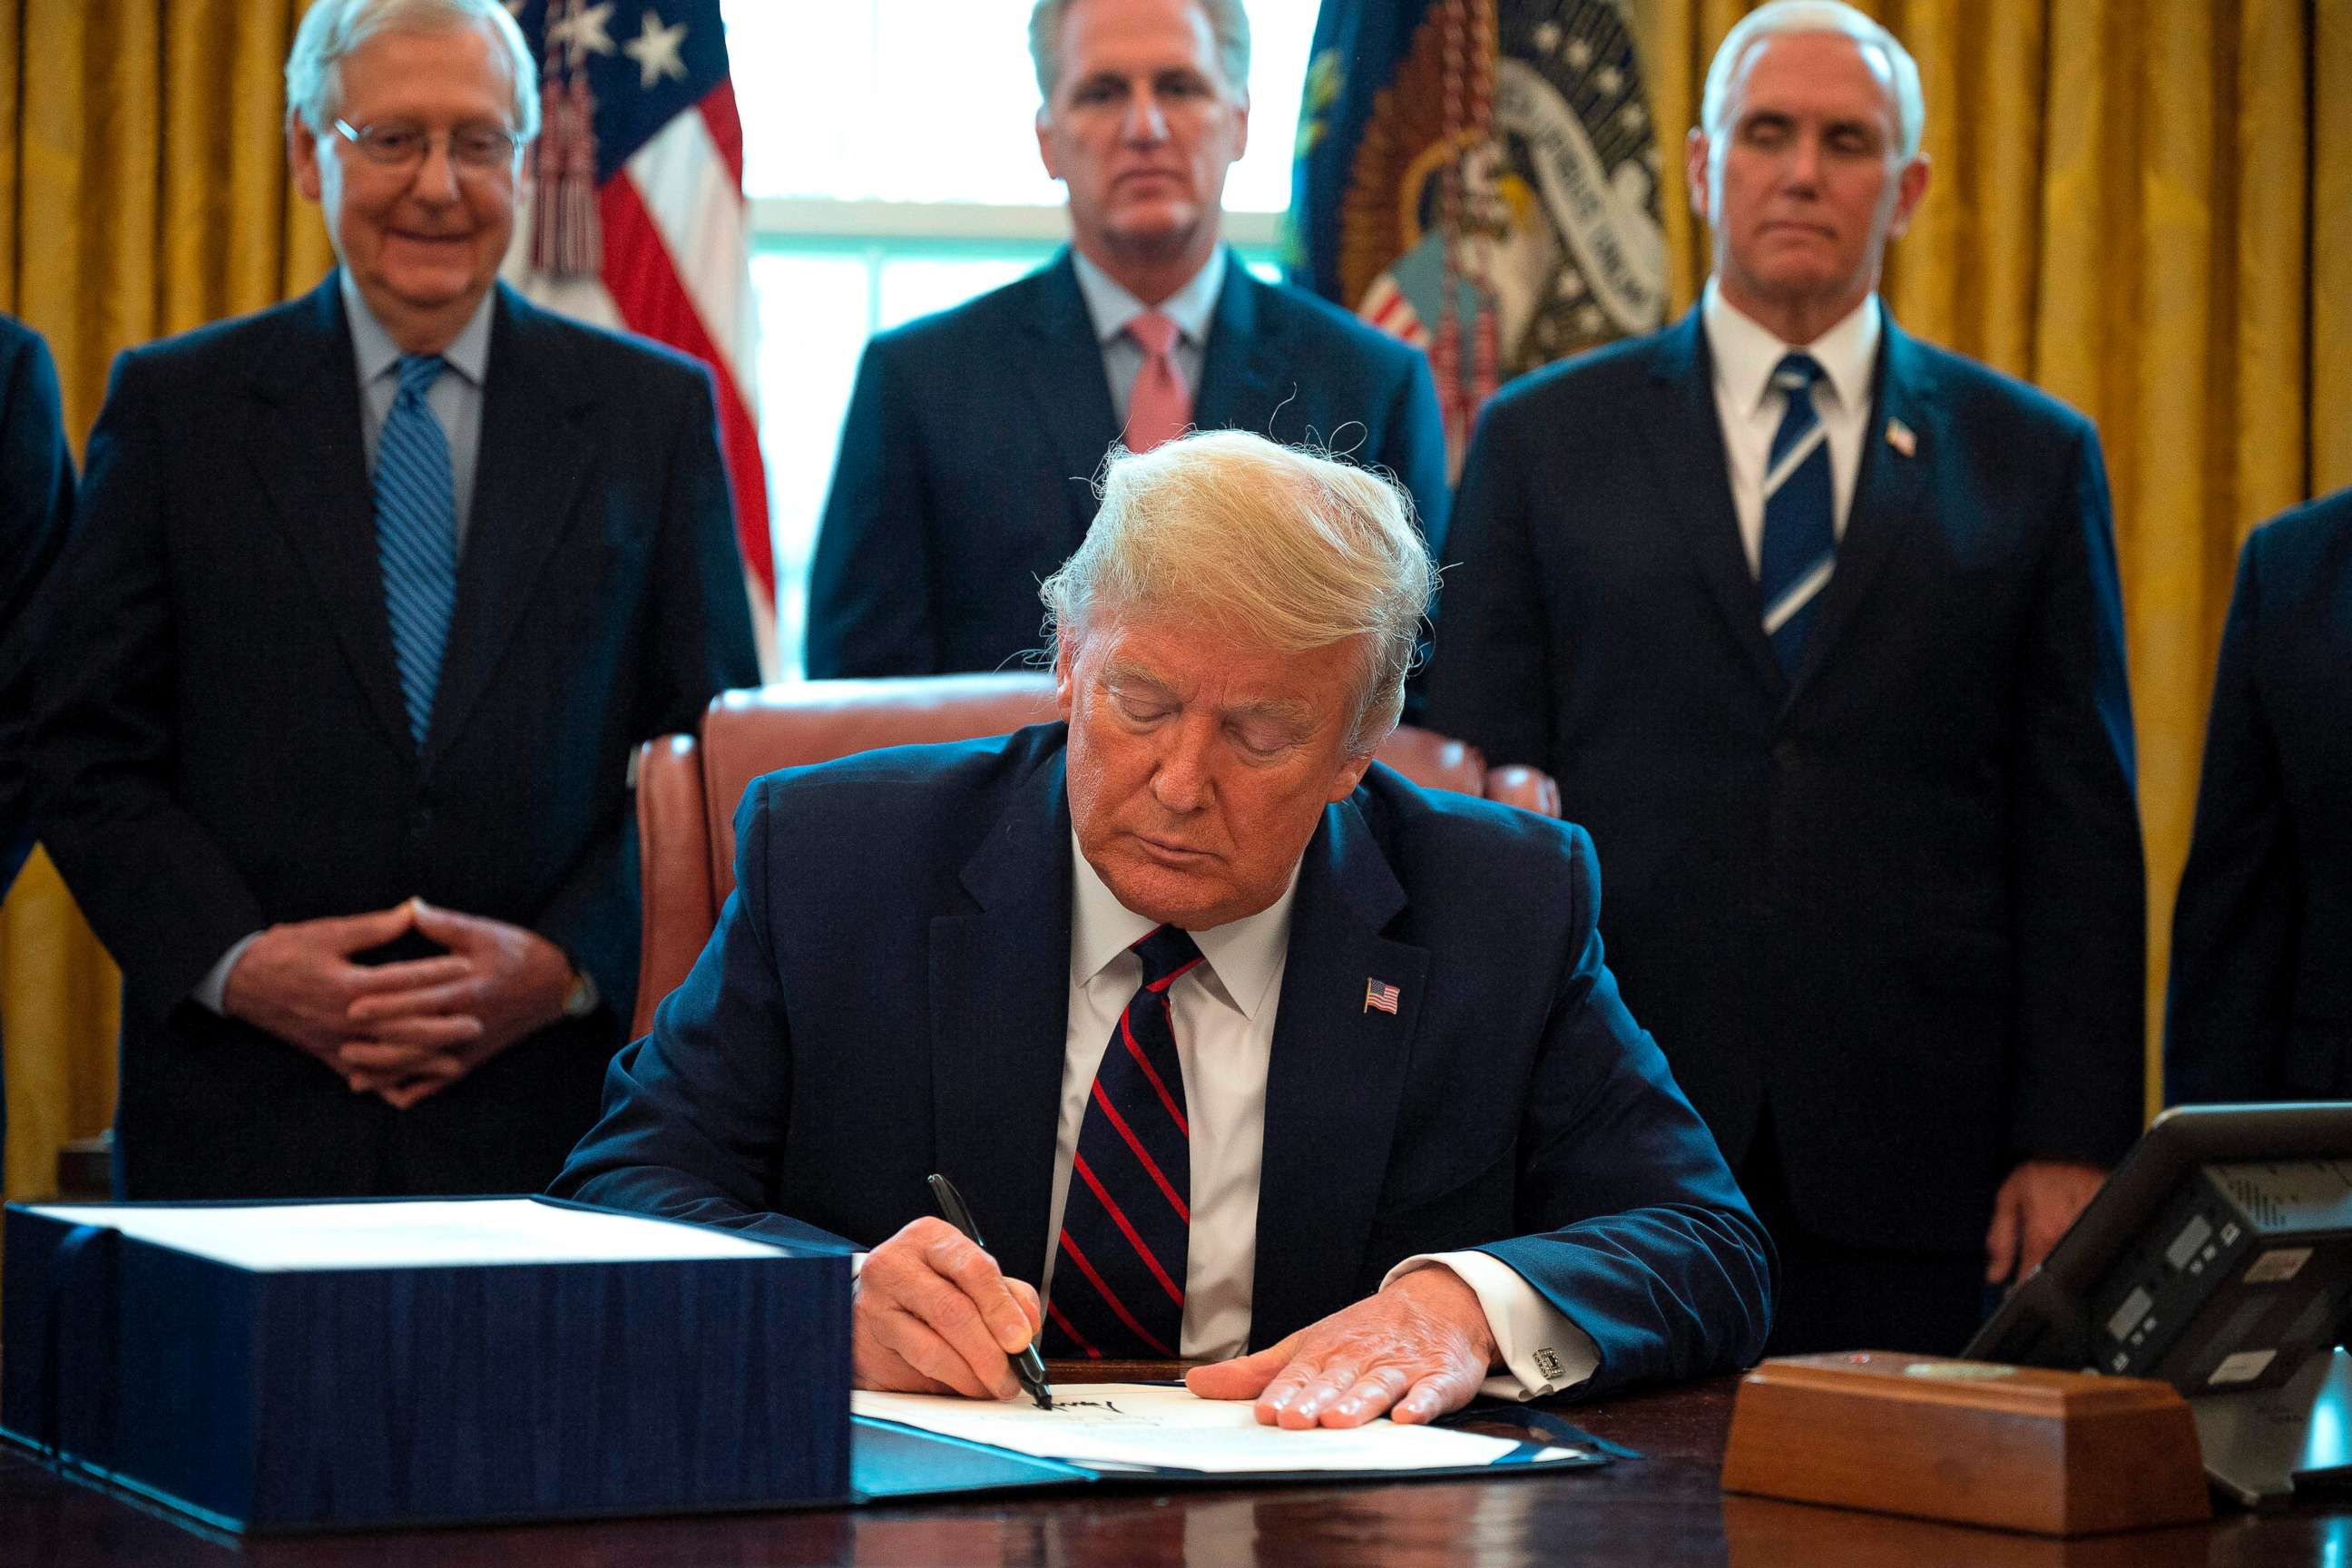 PHOTO: President Donald Trump signs the CARES act, a $2 trillion rescue package to provide economic relief amid the coronavirus outbreak, at the Oval Office of the White House on March 27, 2020.